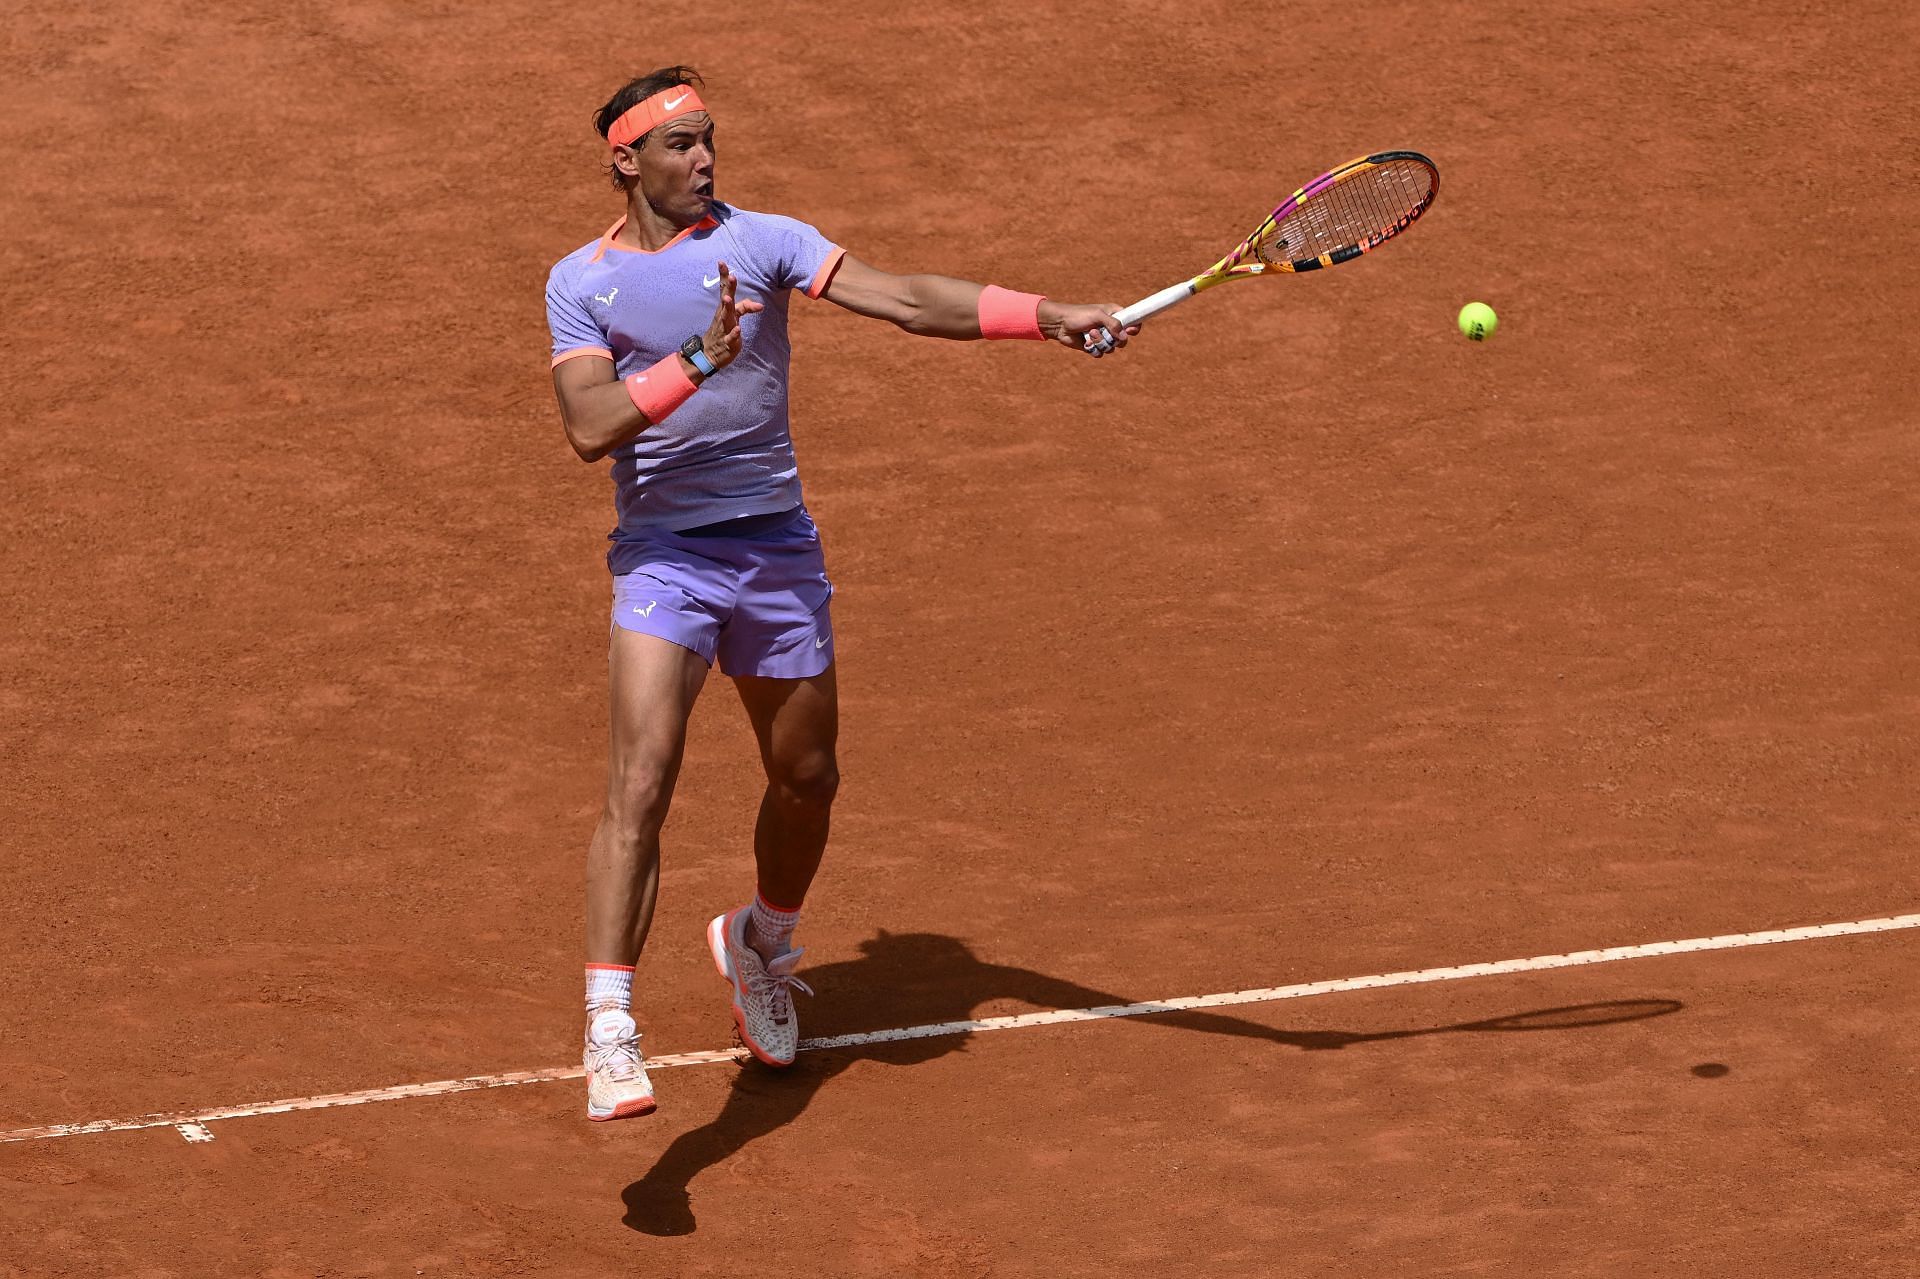 Rafael Nadal in action at the Italian Open